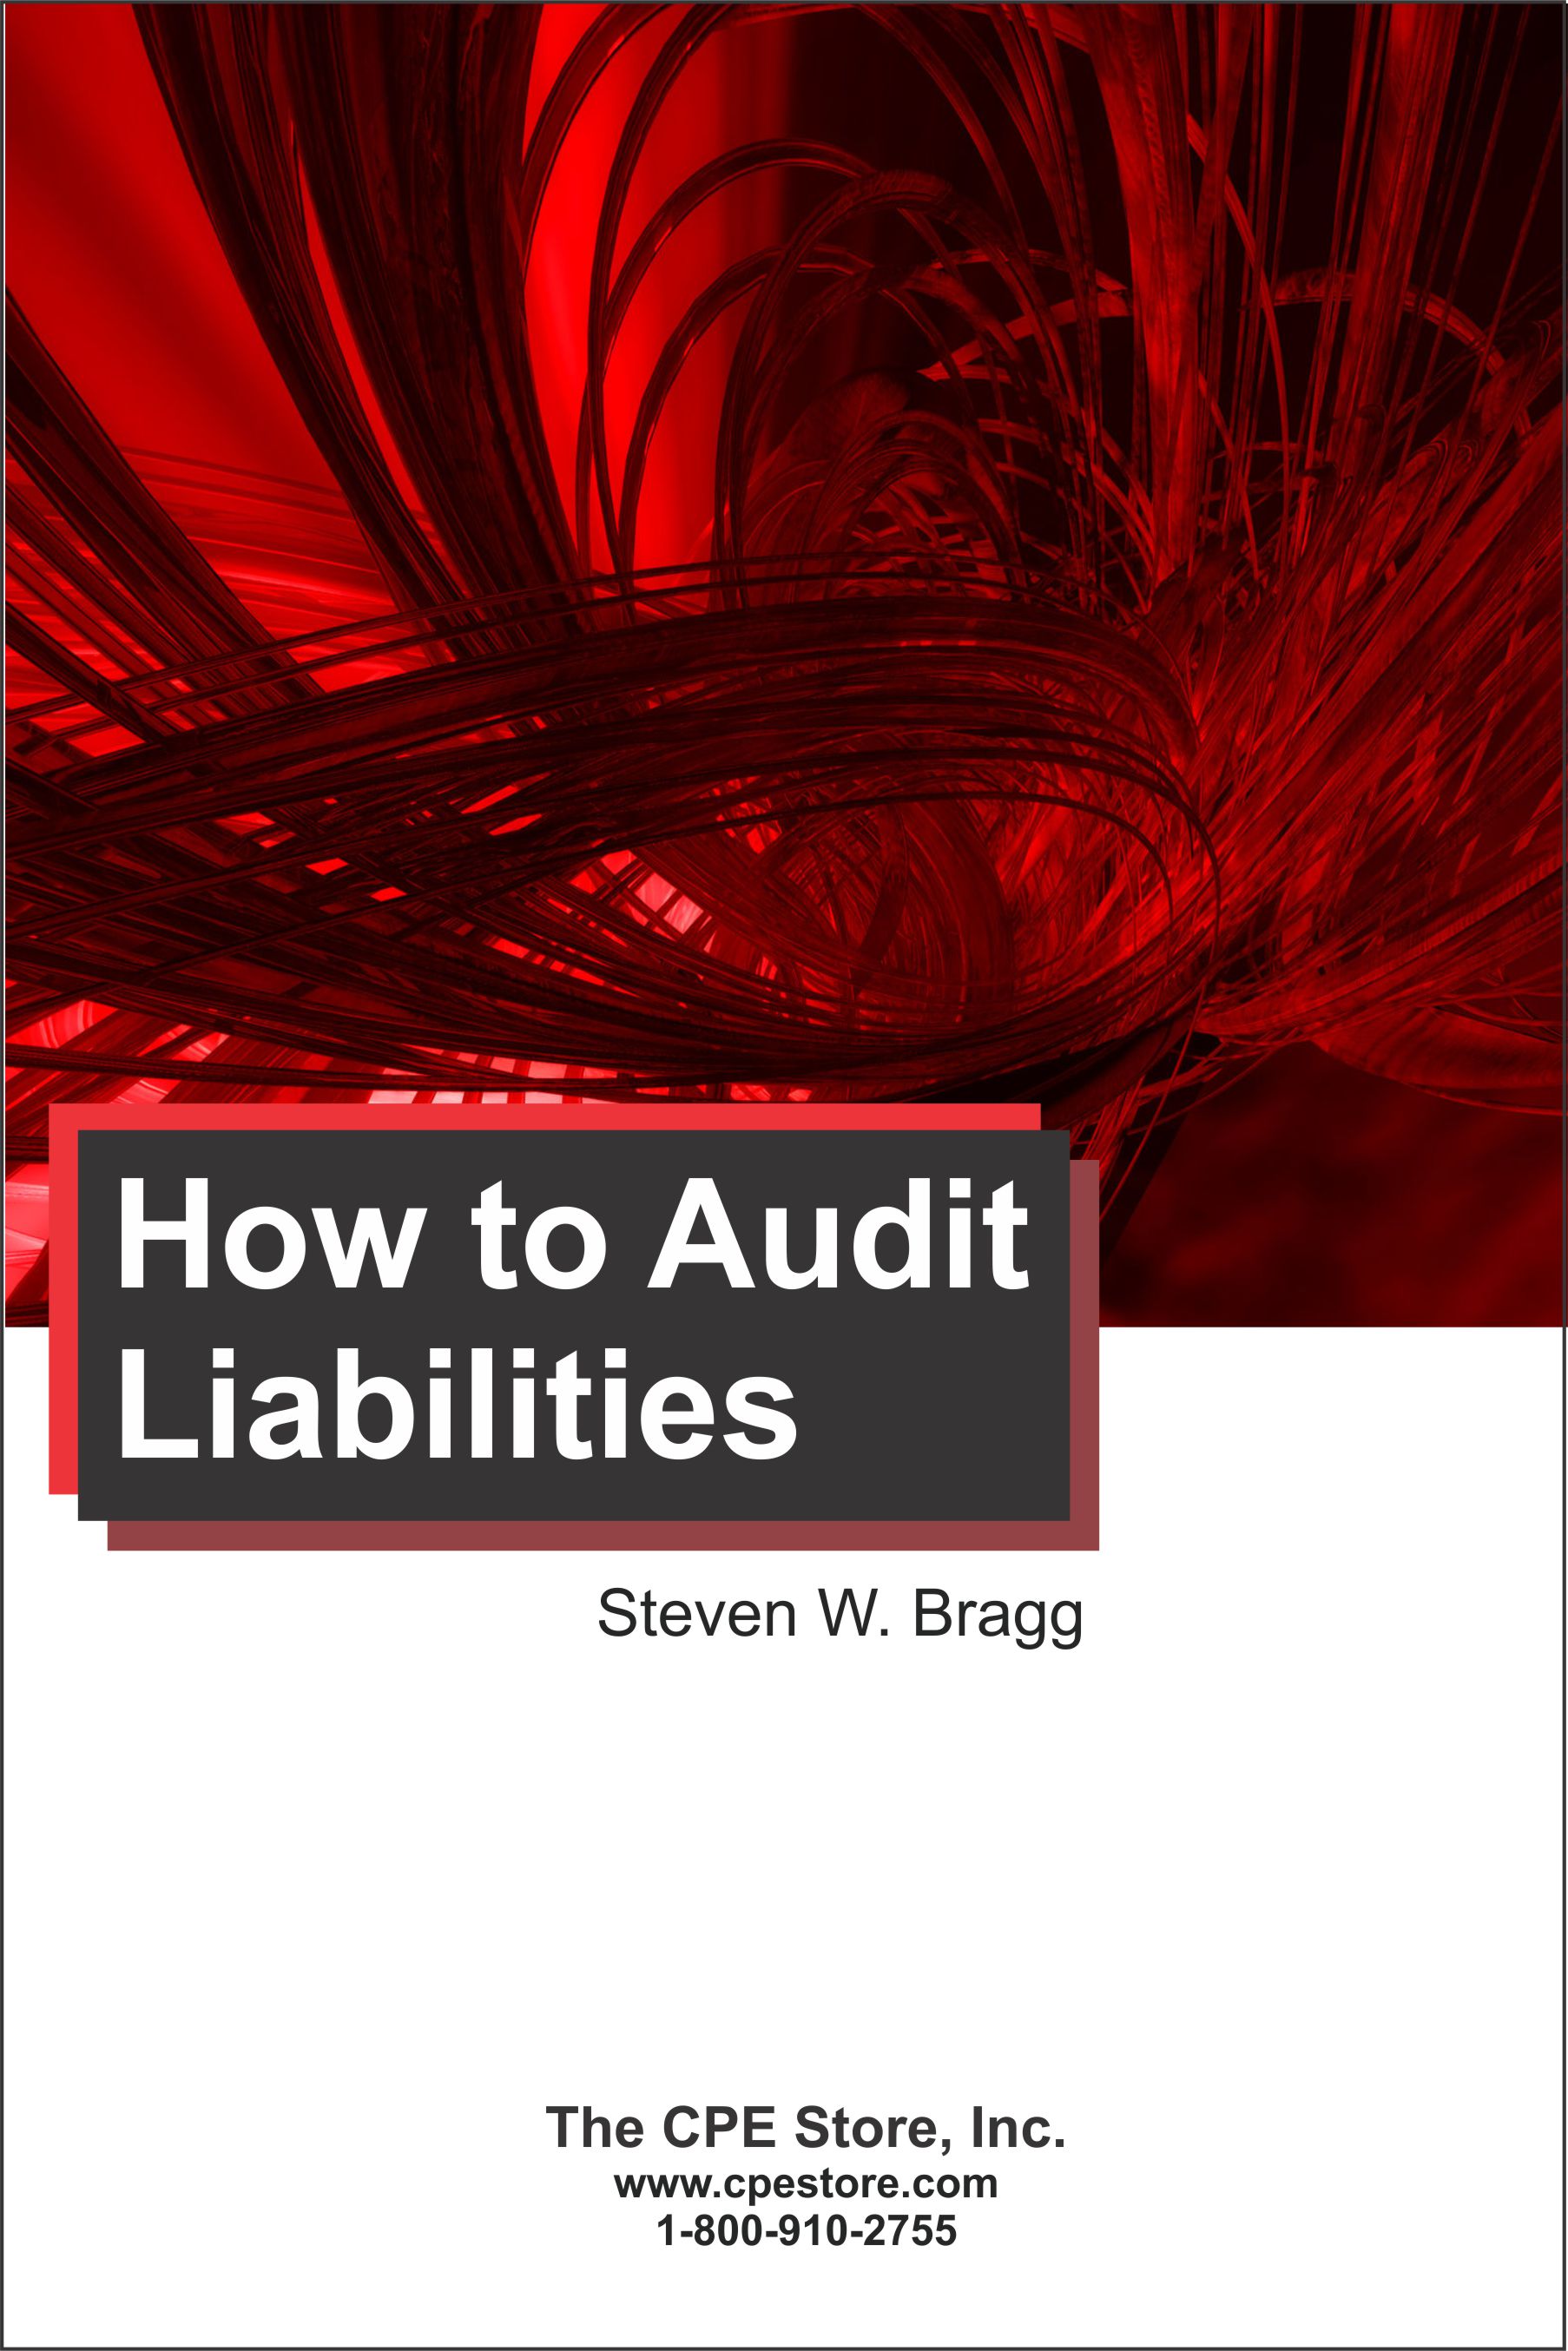 How to Audit Liabilities